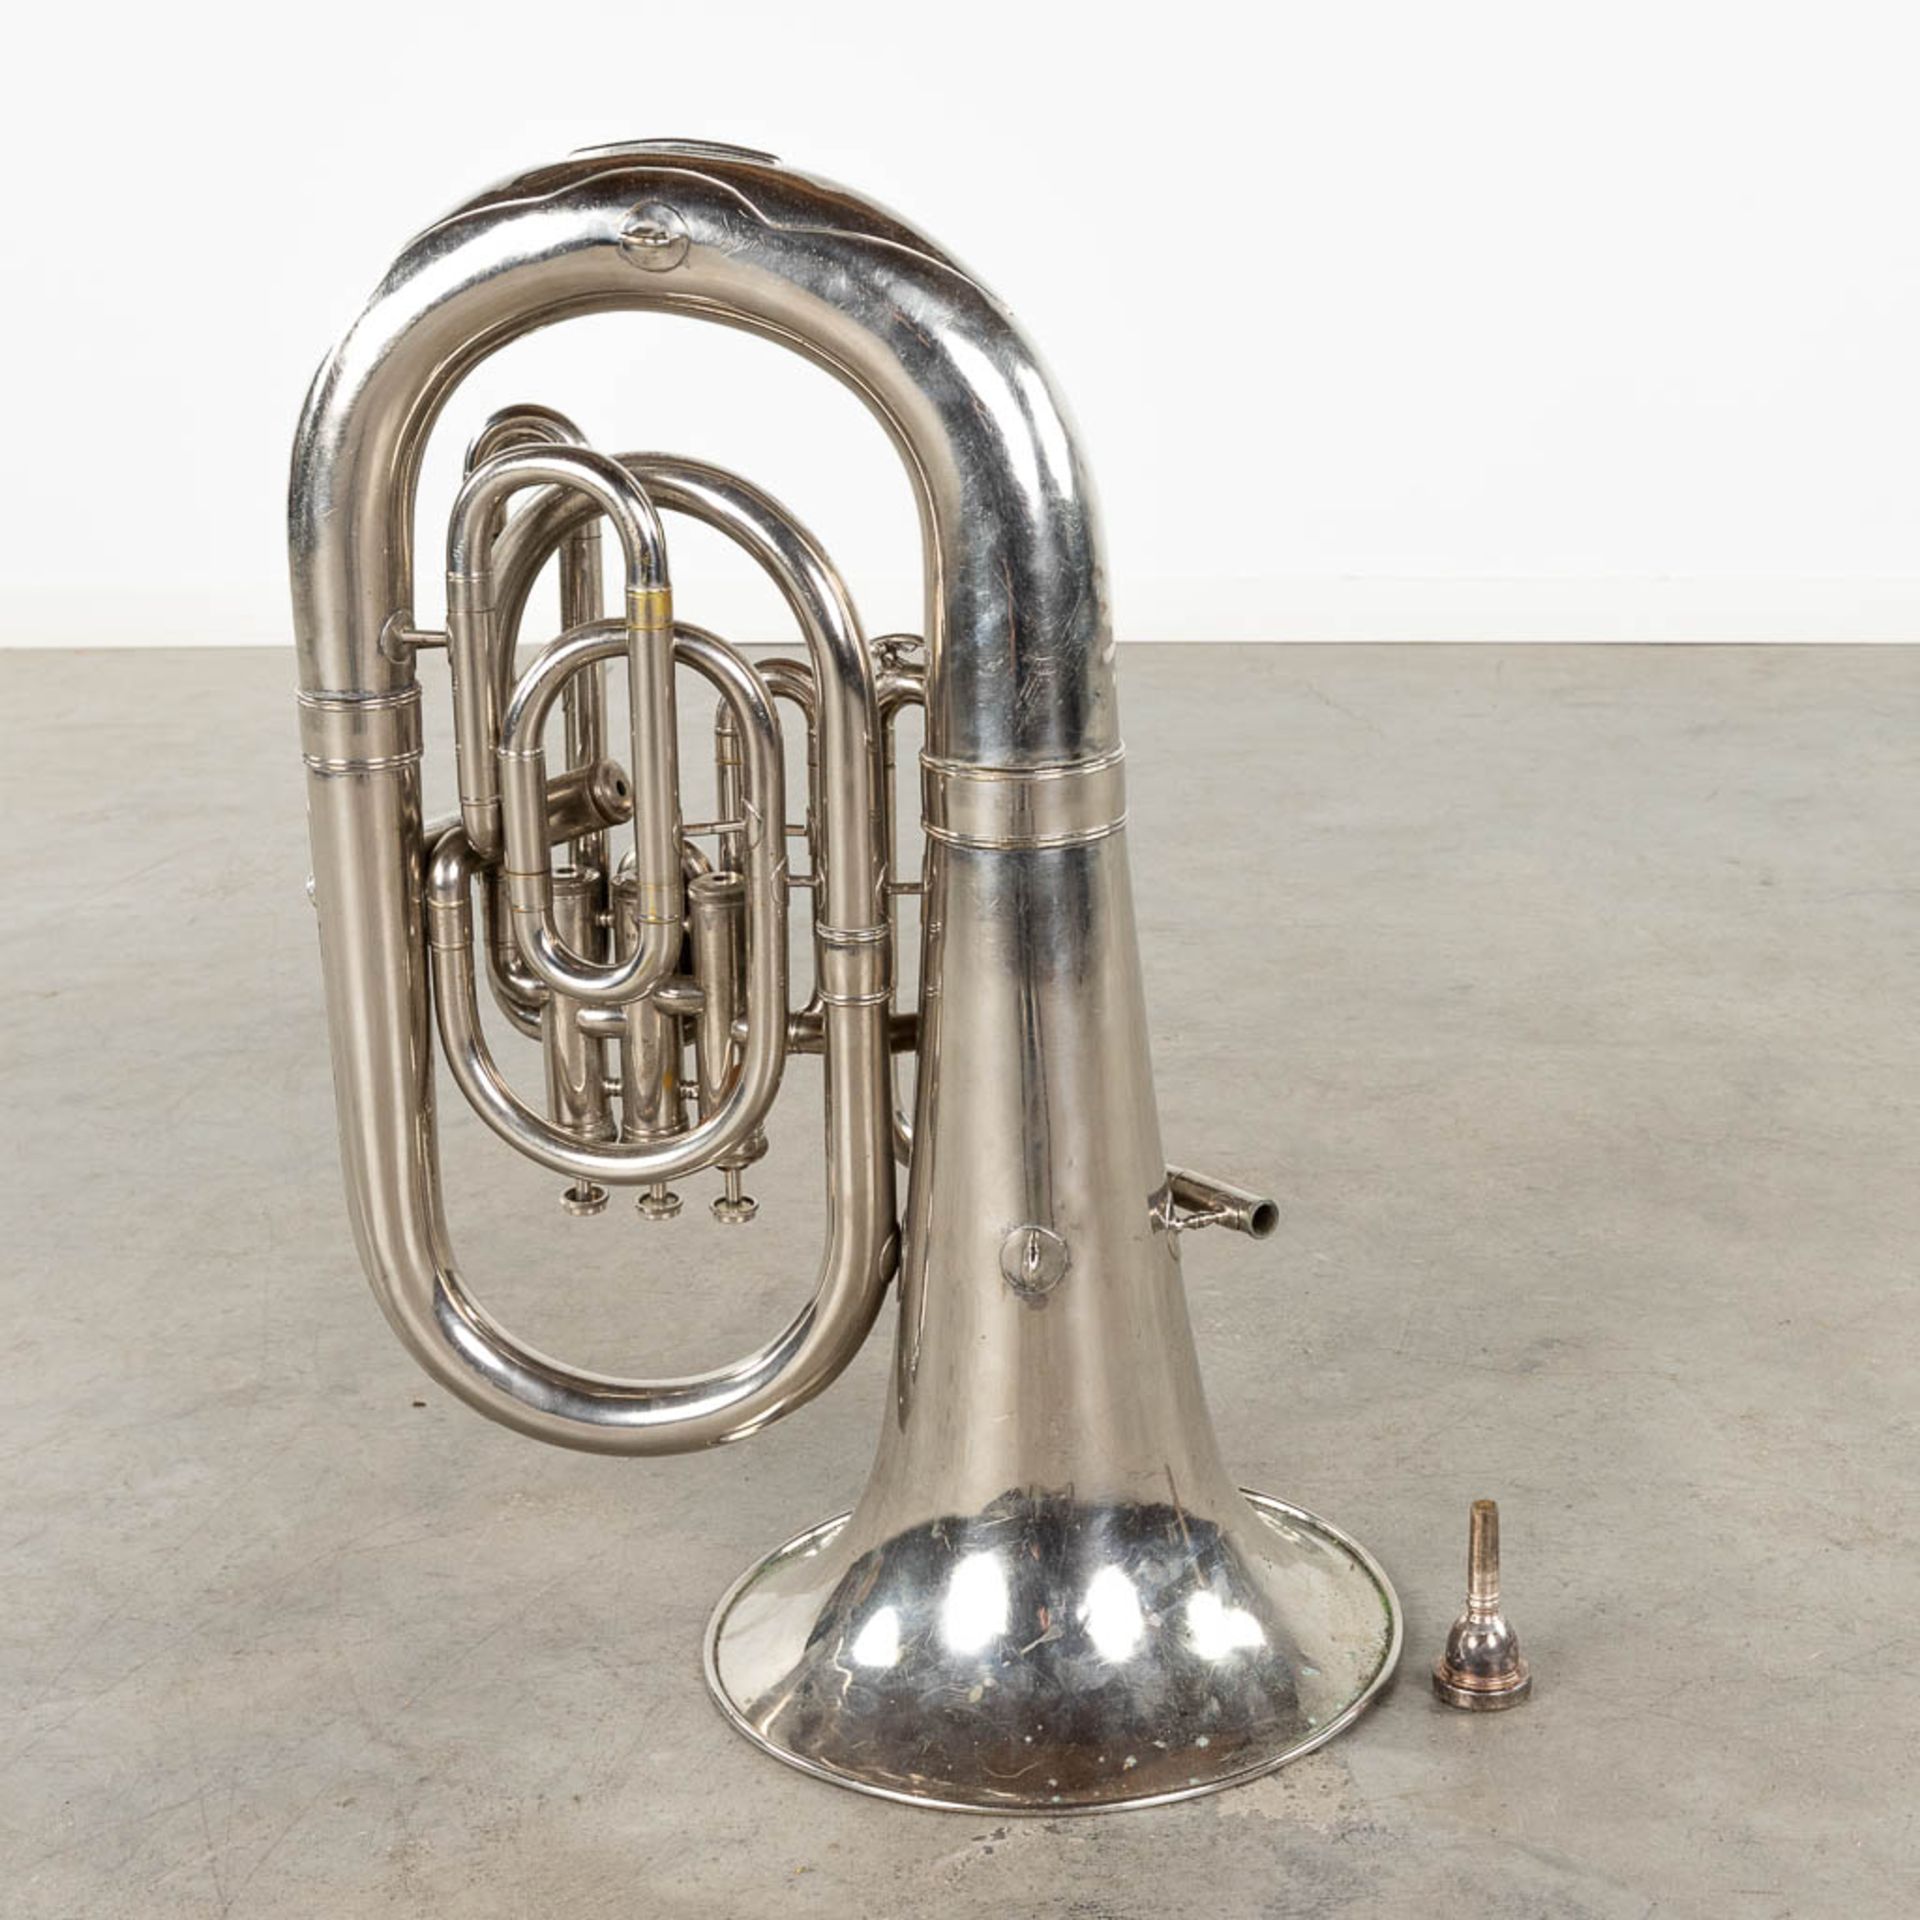 A Brass Tuba, Musical Instrument. The Netherlands, 20th C. (D:47 x W:65 x H:33 cm) - Image 5 of 12